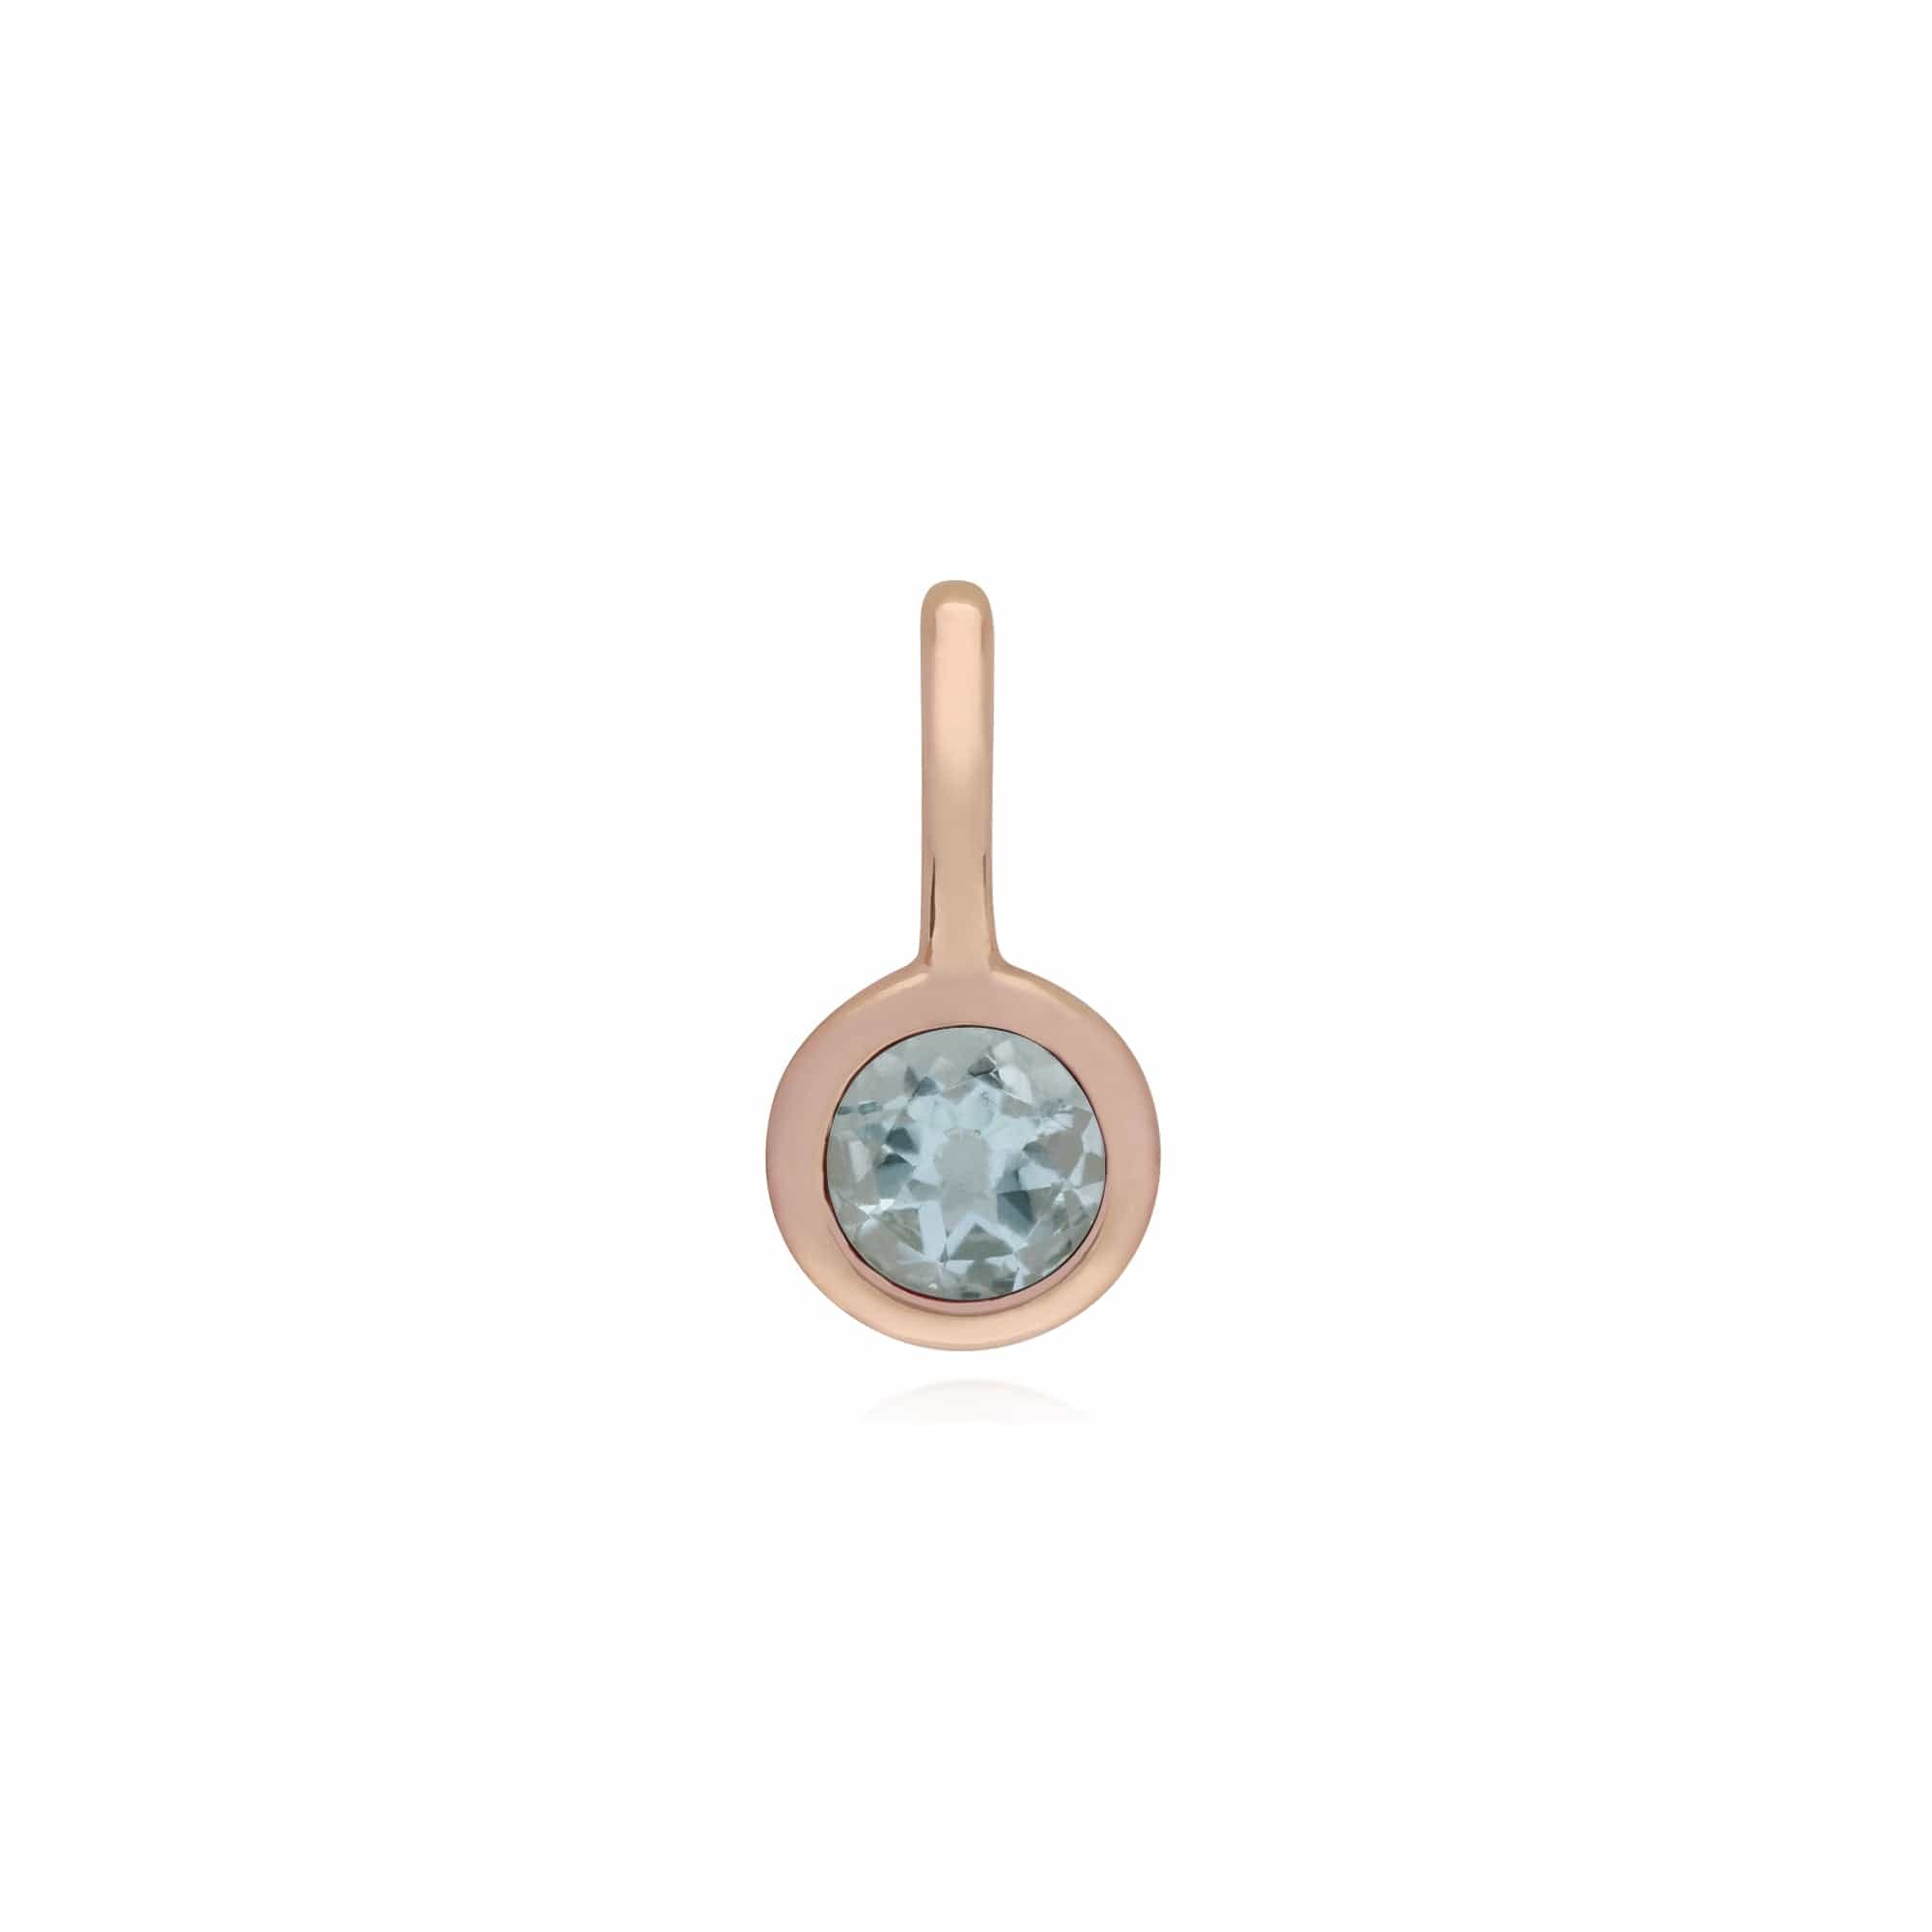 270P027307925-270P026501925 Classic Swirl Heart Lock Pendant & Aquamarine Charm in Rose Gold Plated 925 Sterling Silver 2